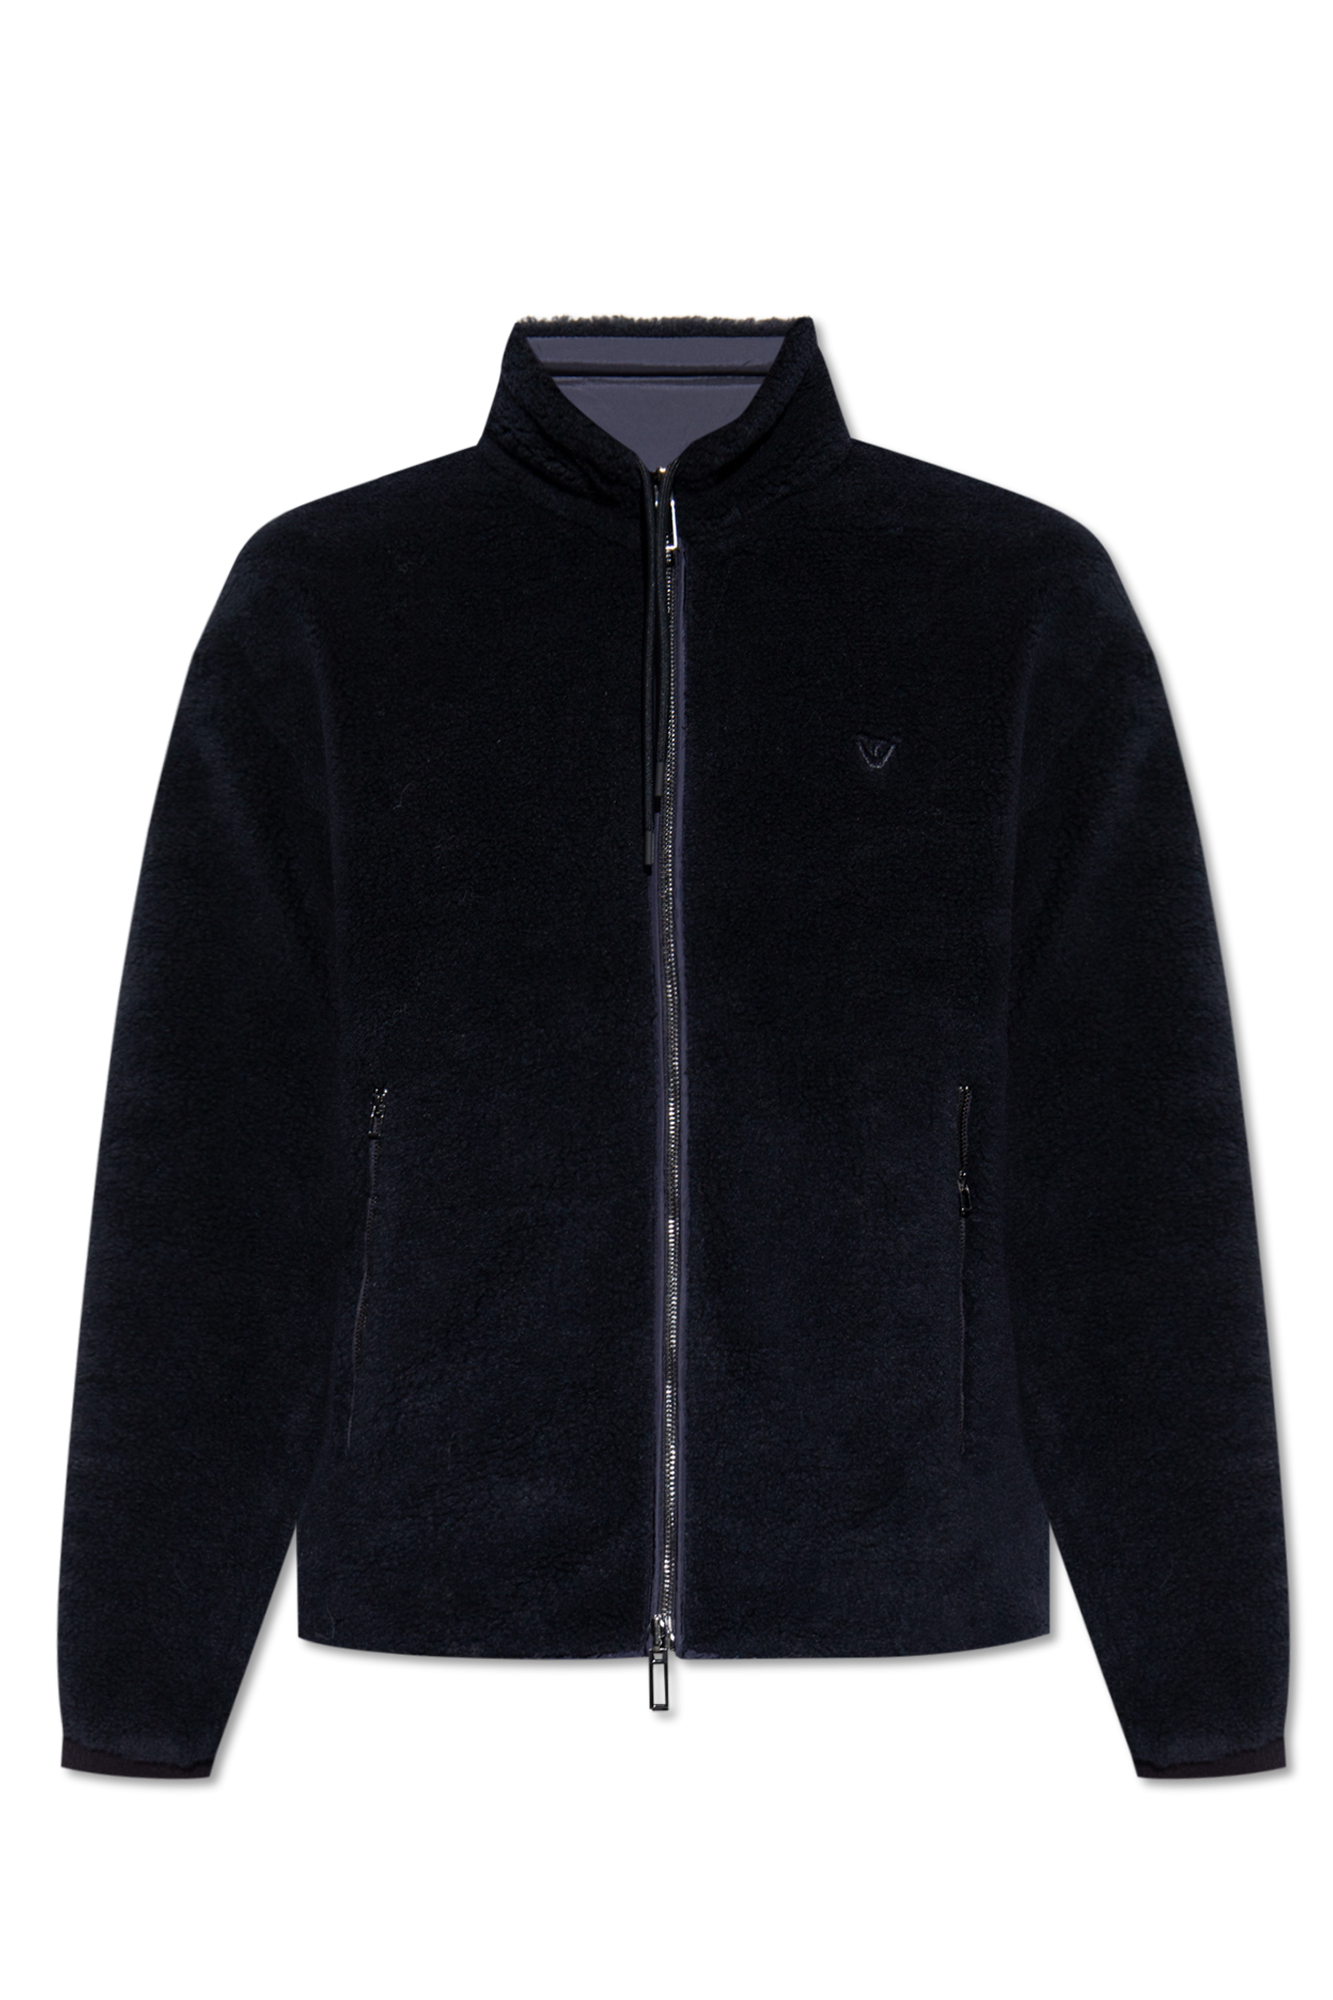 Emporio Armani Reversible jacket with stand collar